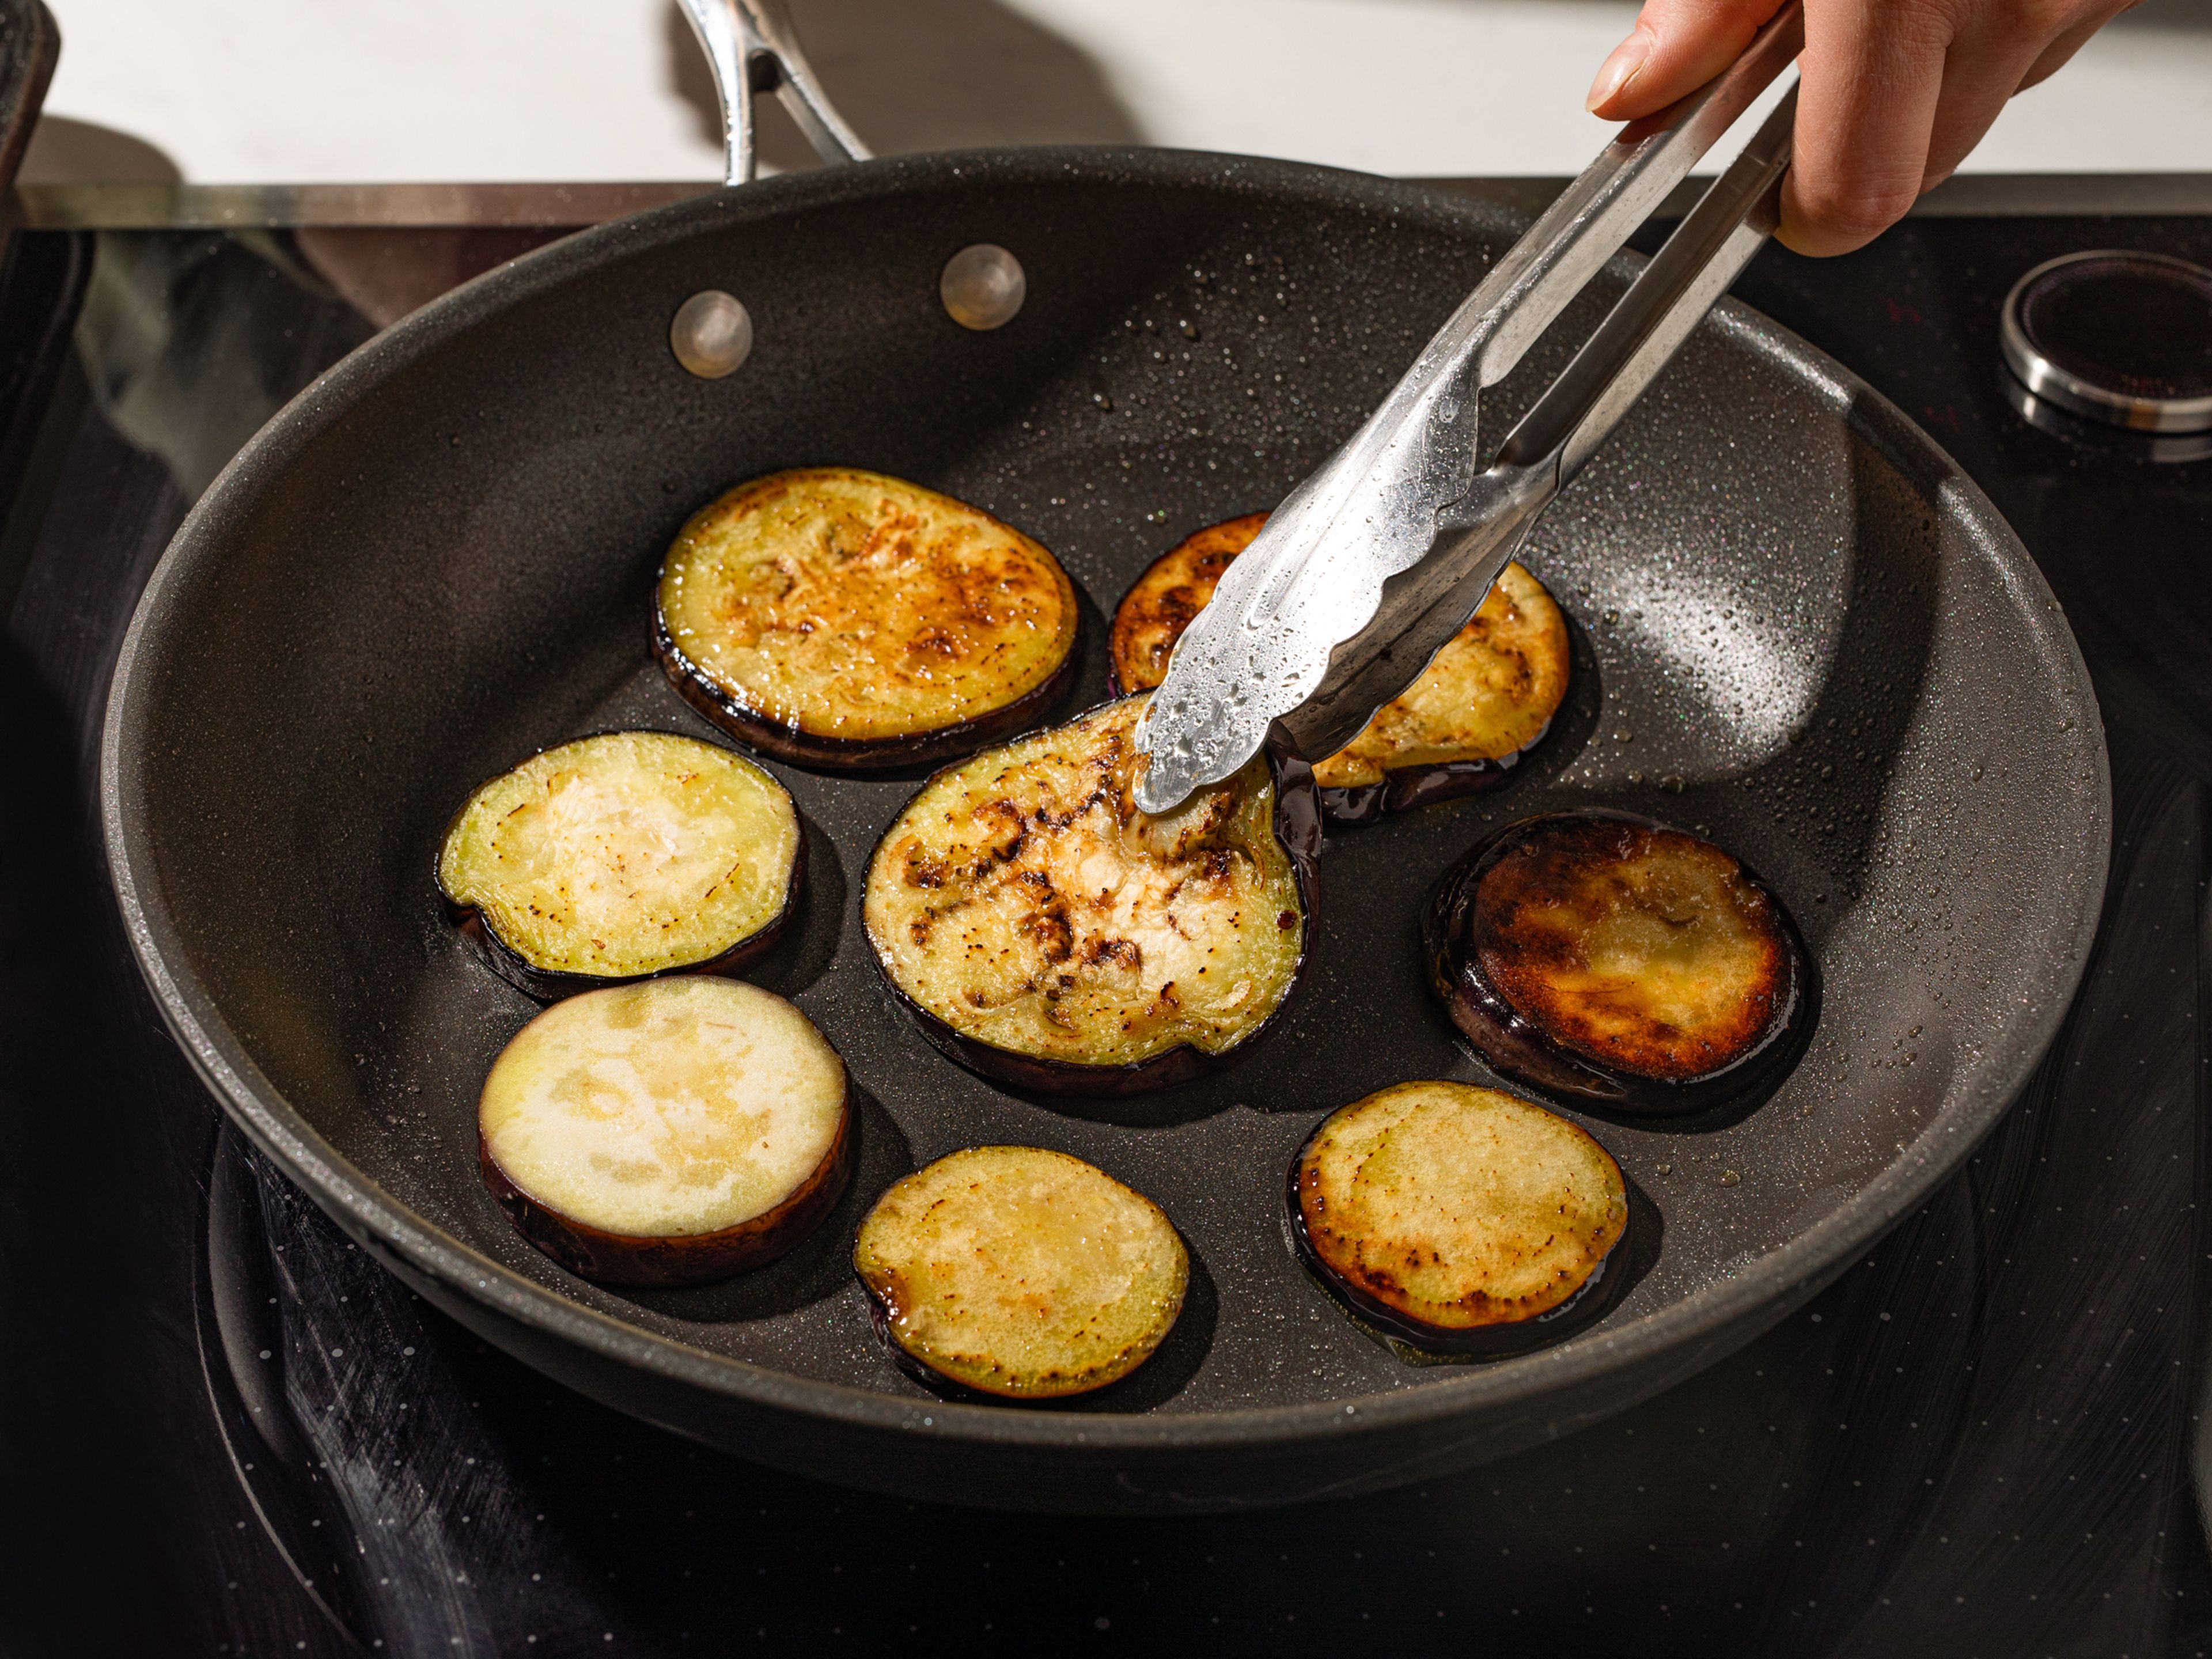 Drain and pat-dry the eggplant with paper towels. Heat olive oil in a nonstick pan, then add eggplant. Fry on both sides until browned and soft.